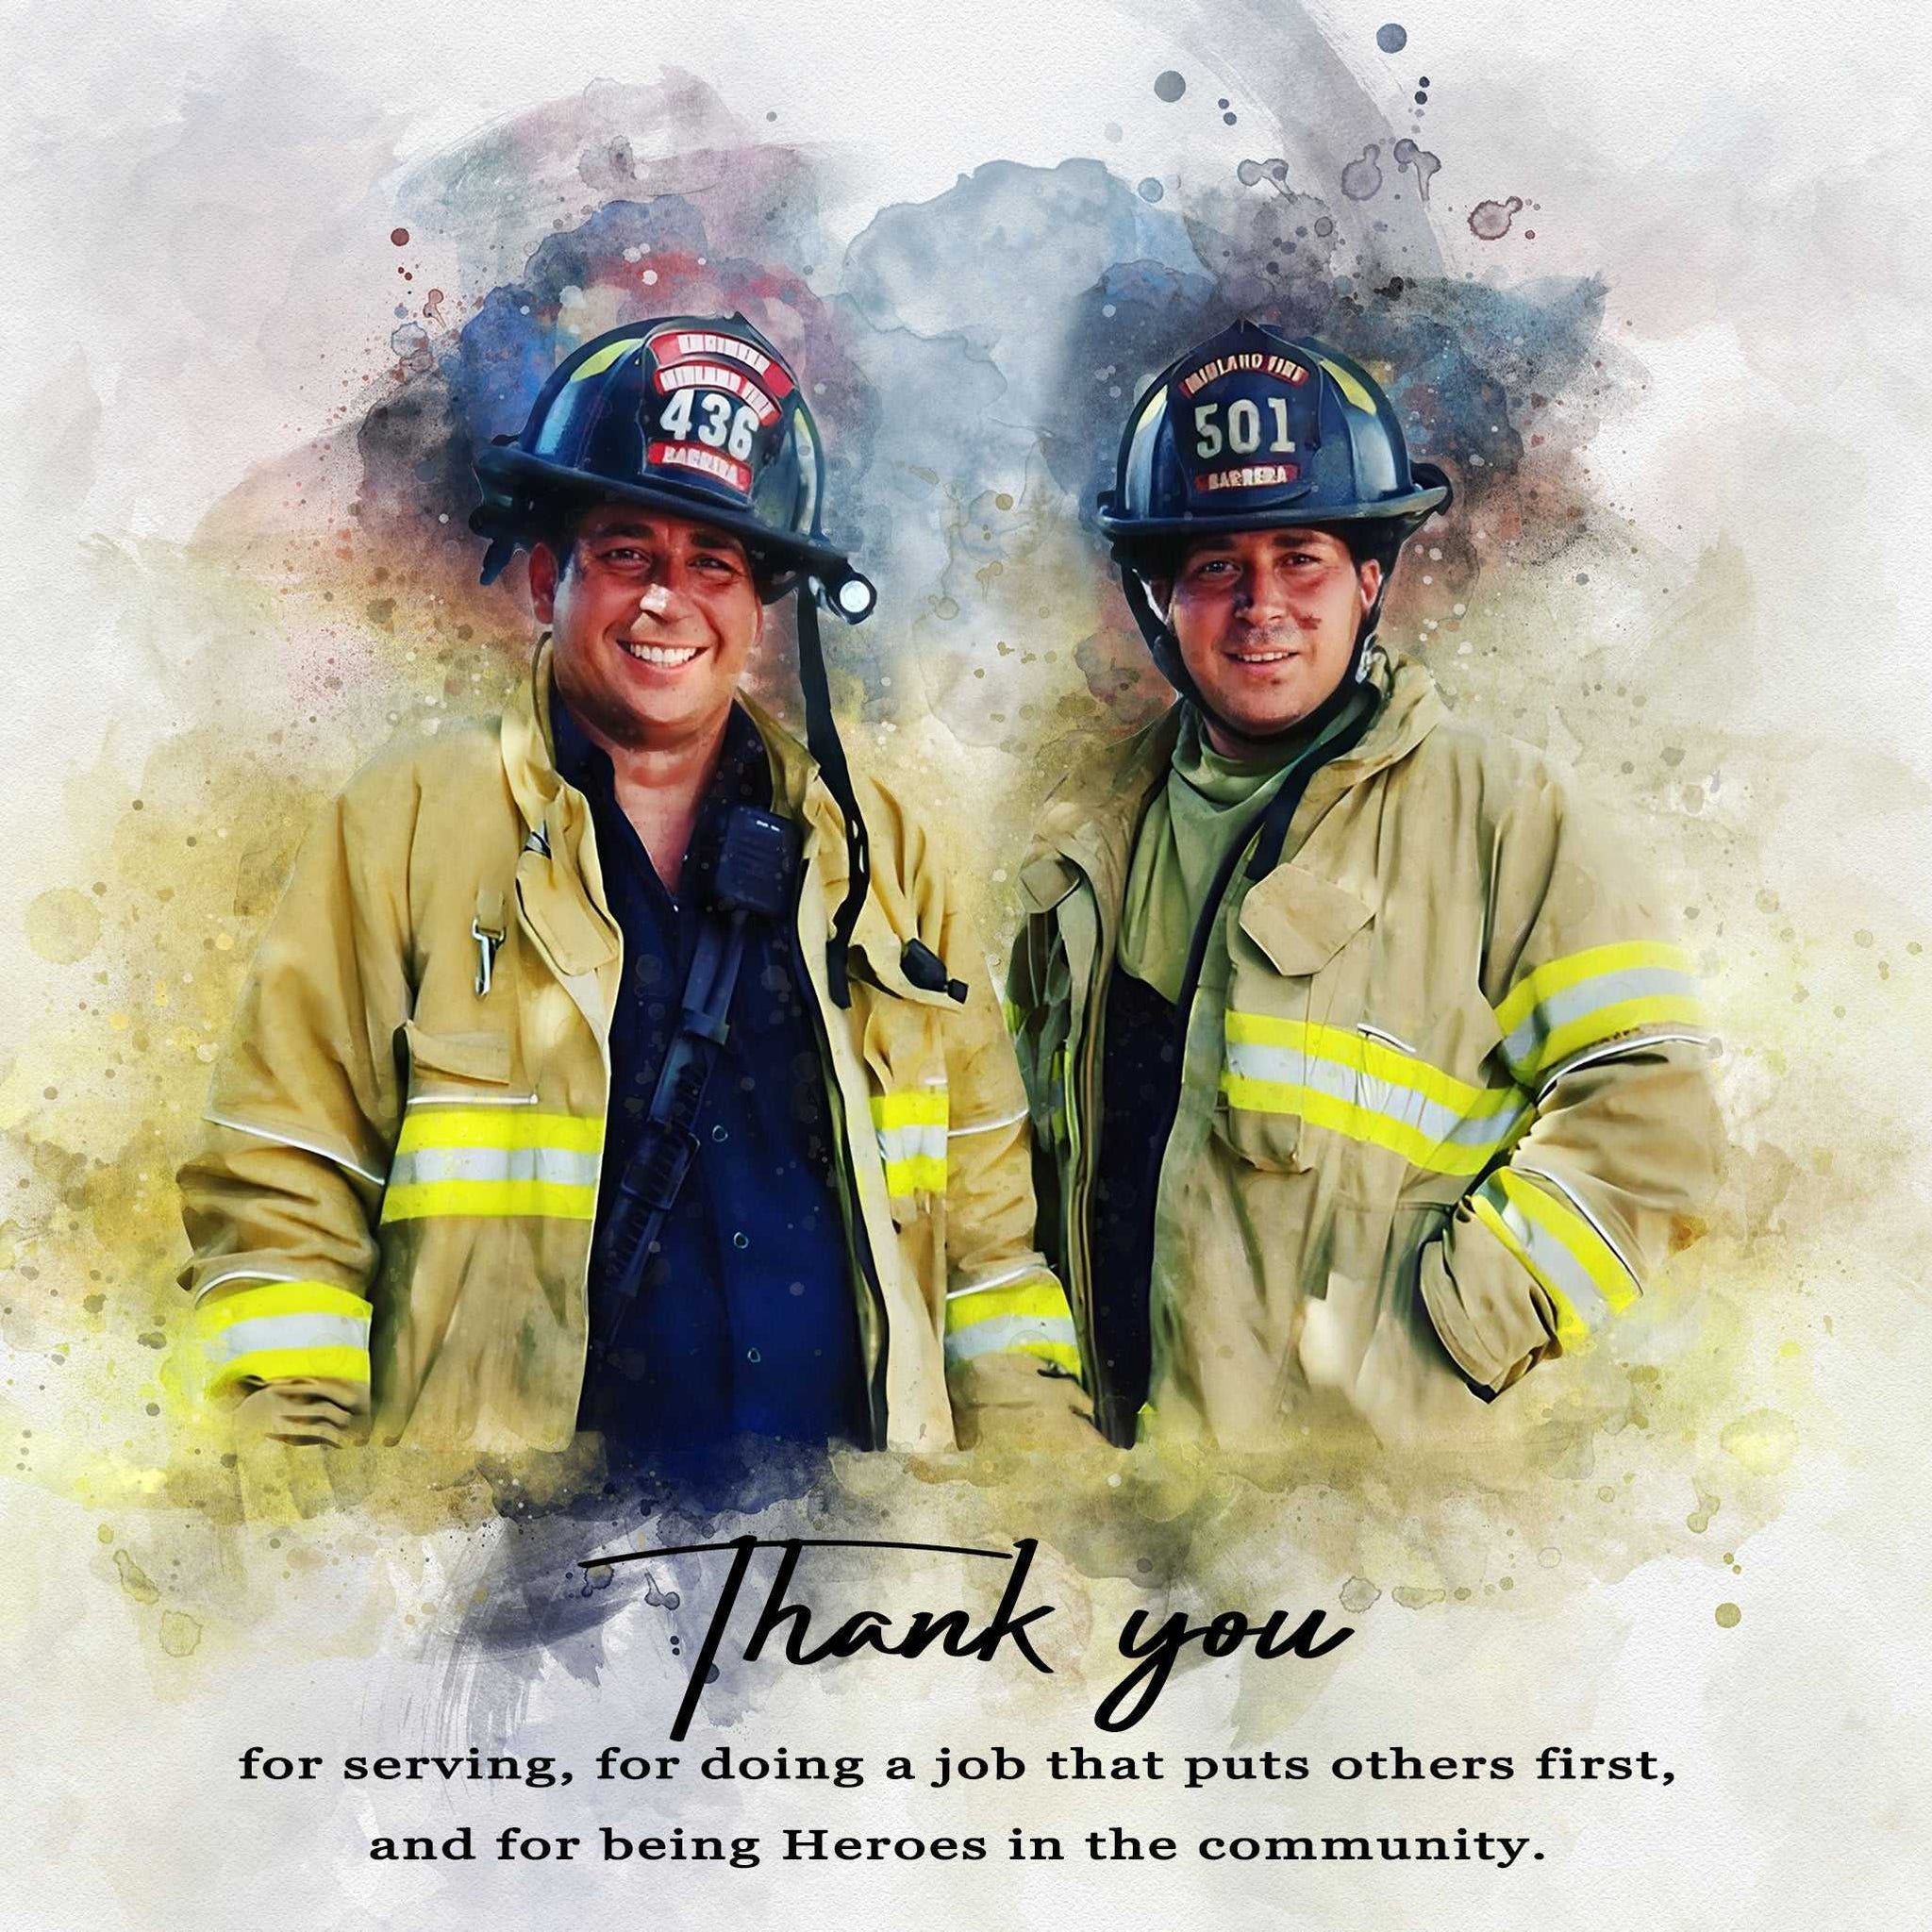 Firefighter Gifts 🔥🧯 Fire Department Gifts | Firefighter Retirement Gifts | Firefighter Presents Ideas | Fireman Gifts - FromPicToArt